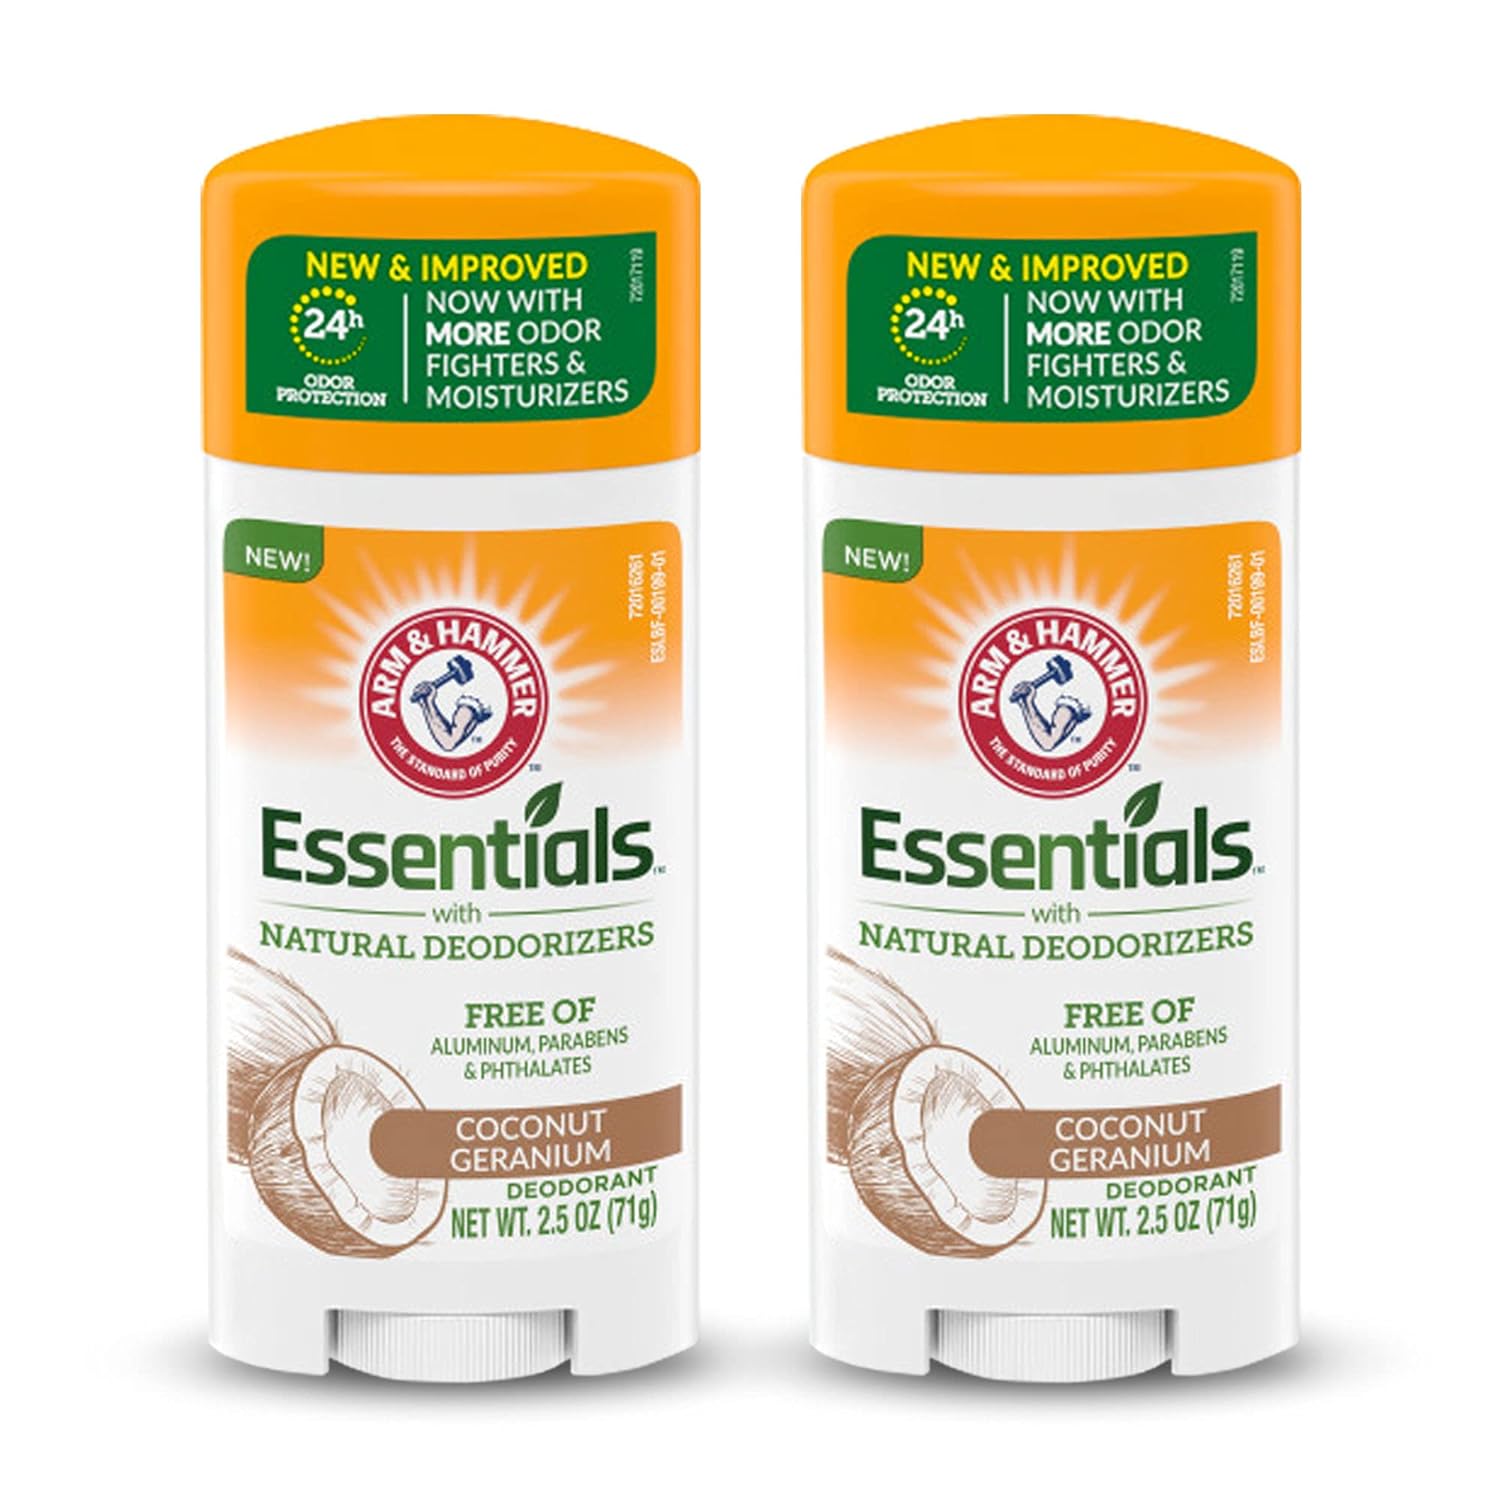 ARM & HAMMER Essentials Deodorant - Made with Natural Deodorizers - Coconut Geranium - Free From Aluminum, Parabens & Phthalates, 2.5 oz (Pack of 2)